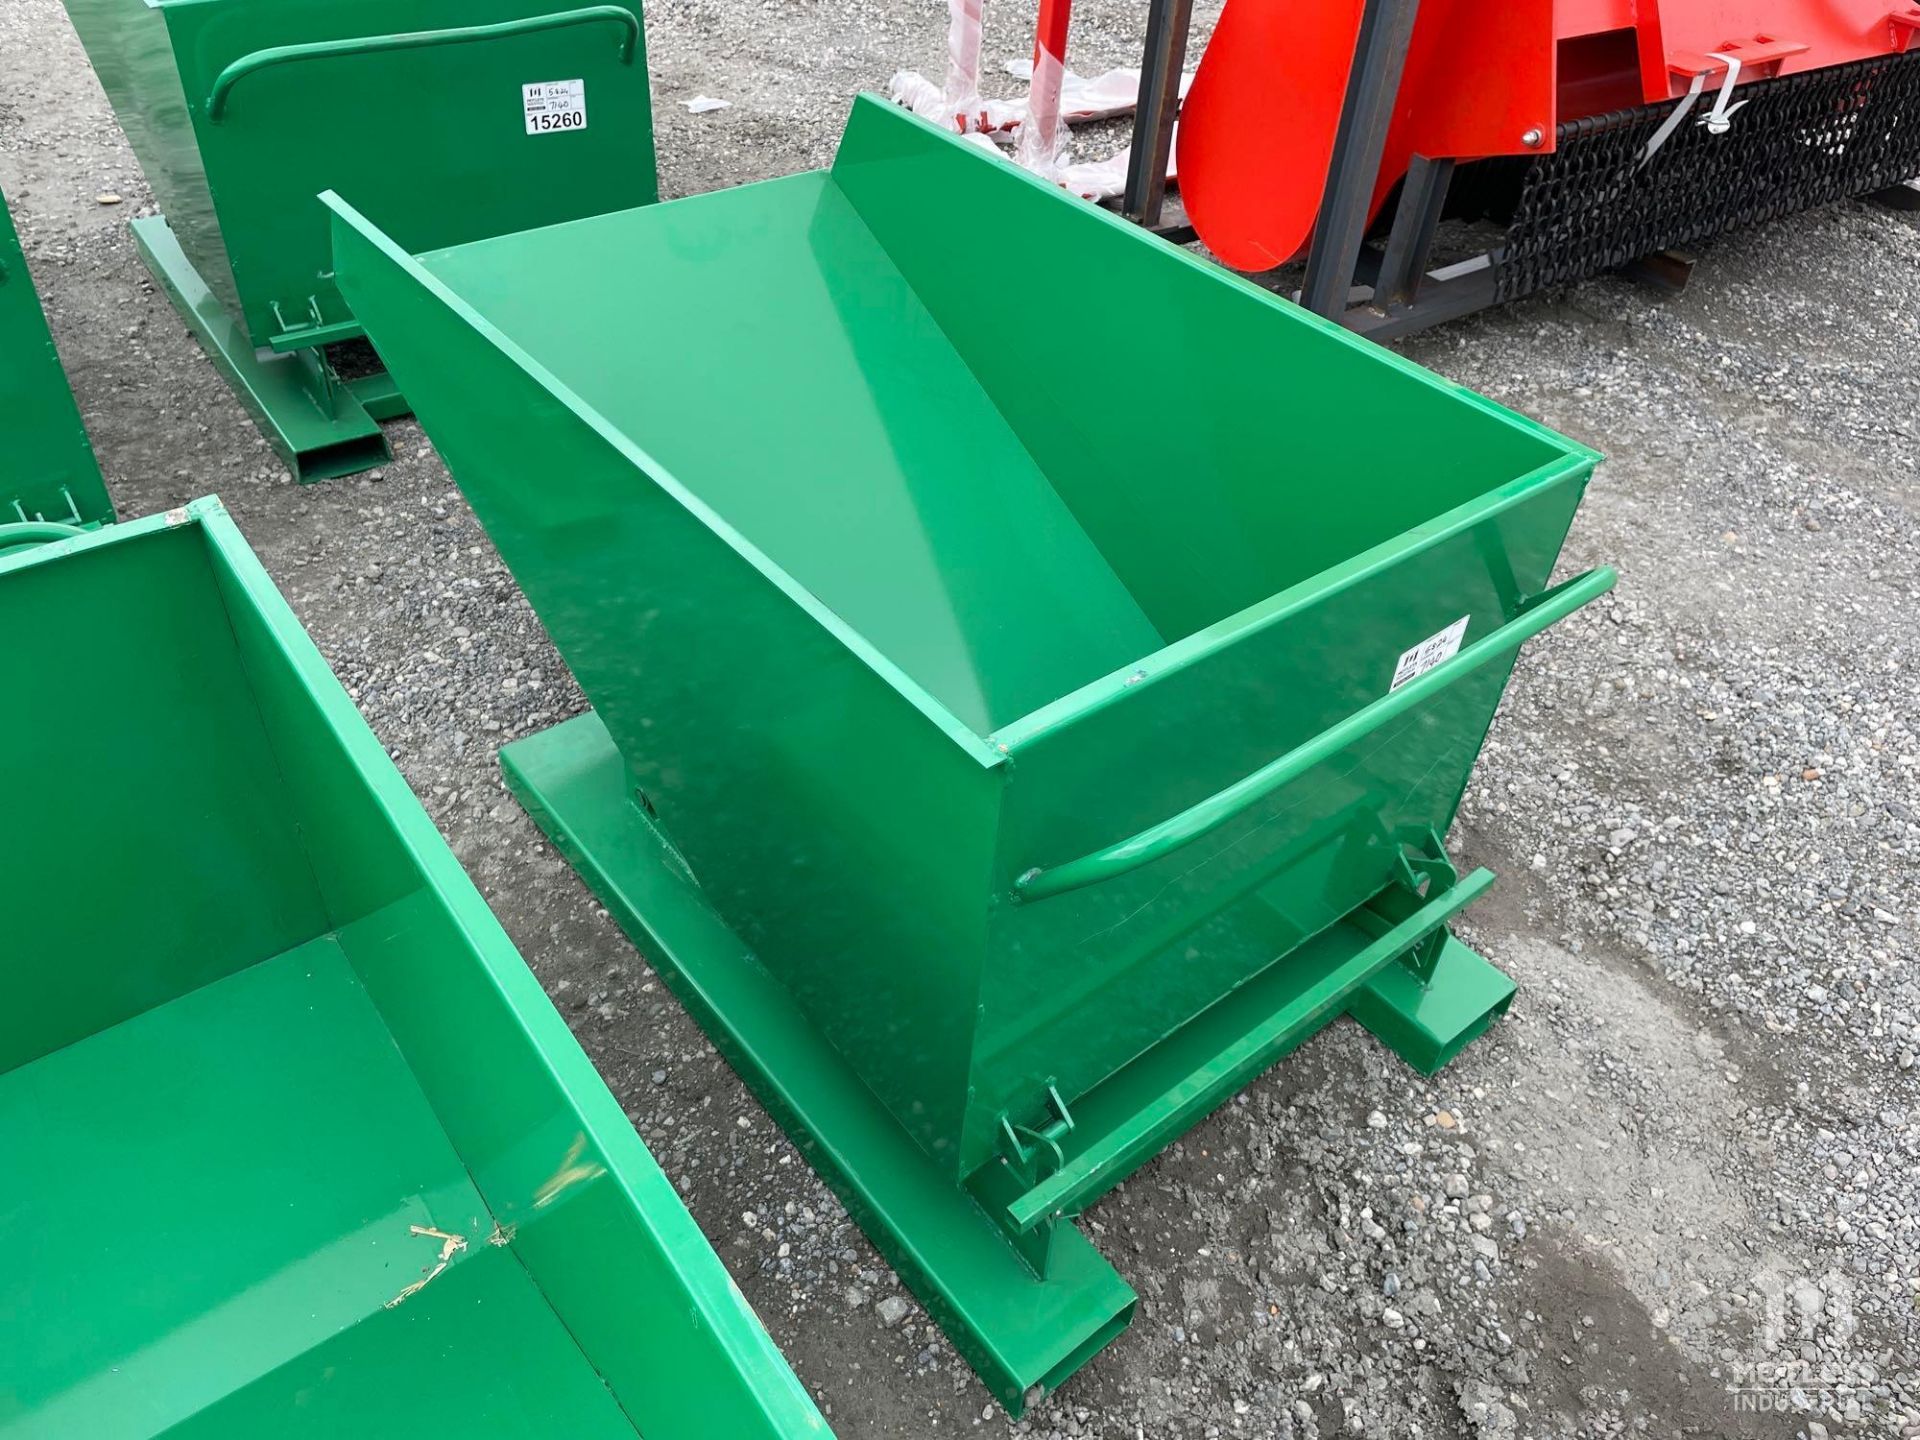 Diggit TG50 Carbon Steel Turnover Box / Hopper - Image 4 of 5